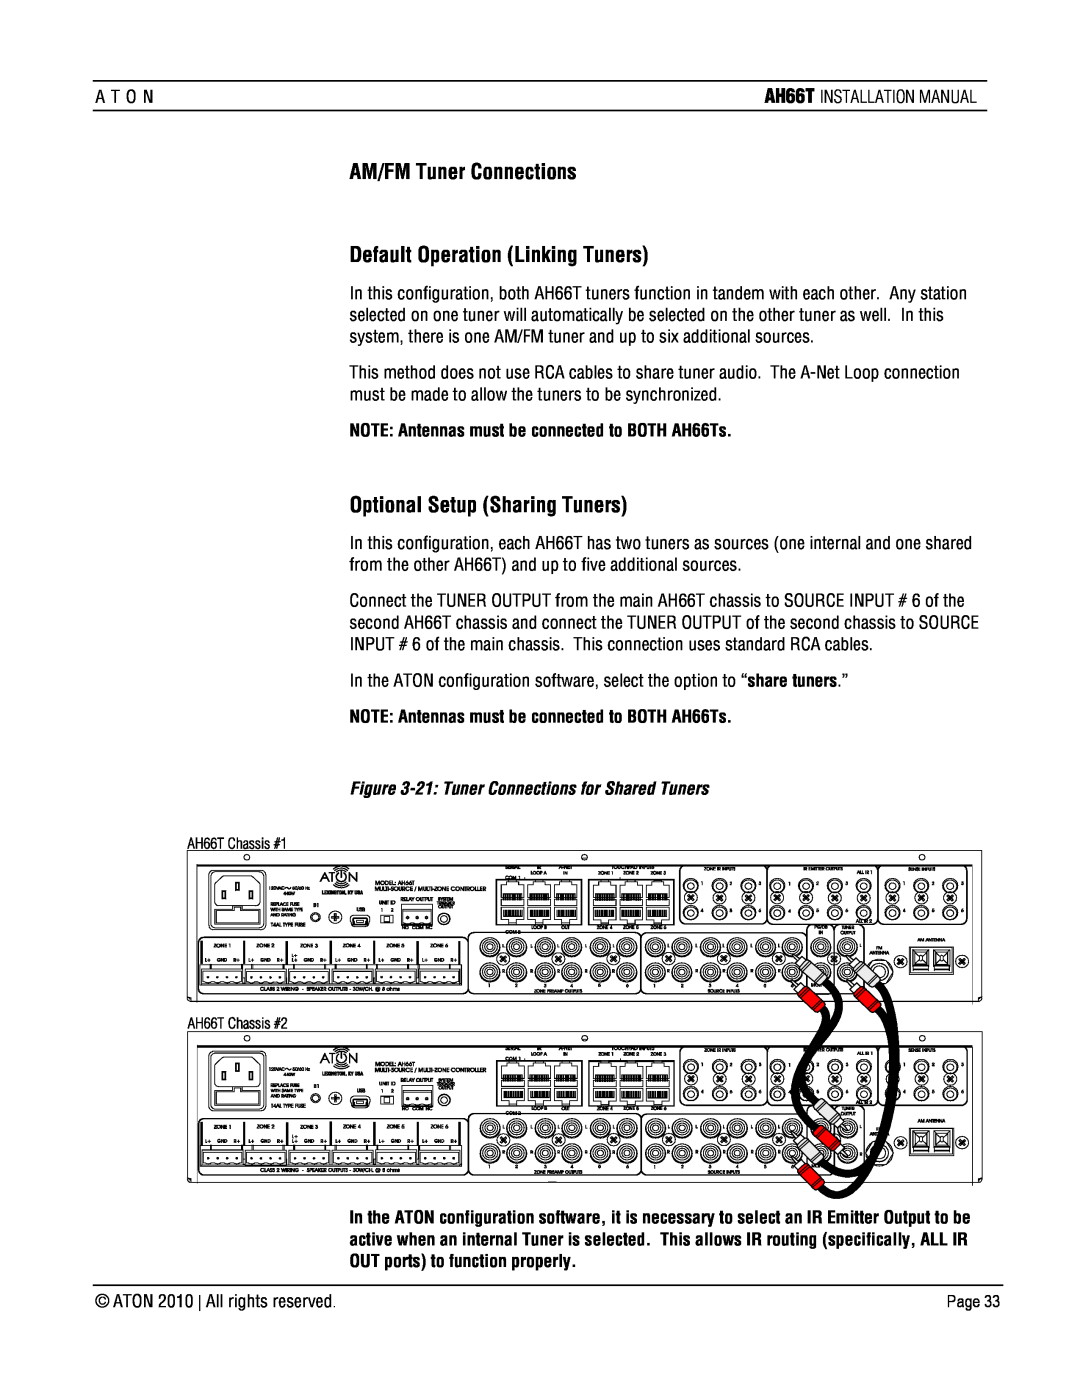 ATON AH66T-KT installation manual AM/FM Tuner Connections, Default Operation Linking Tuners, Optional Setup Sharing Tuners 